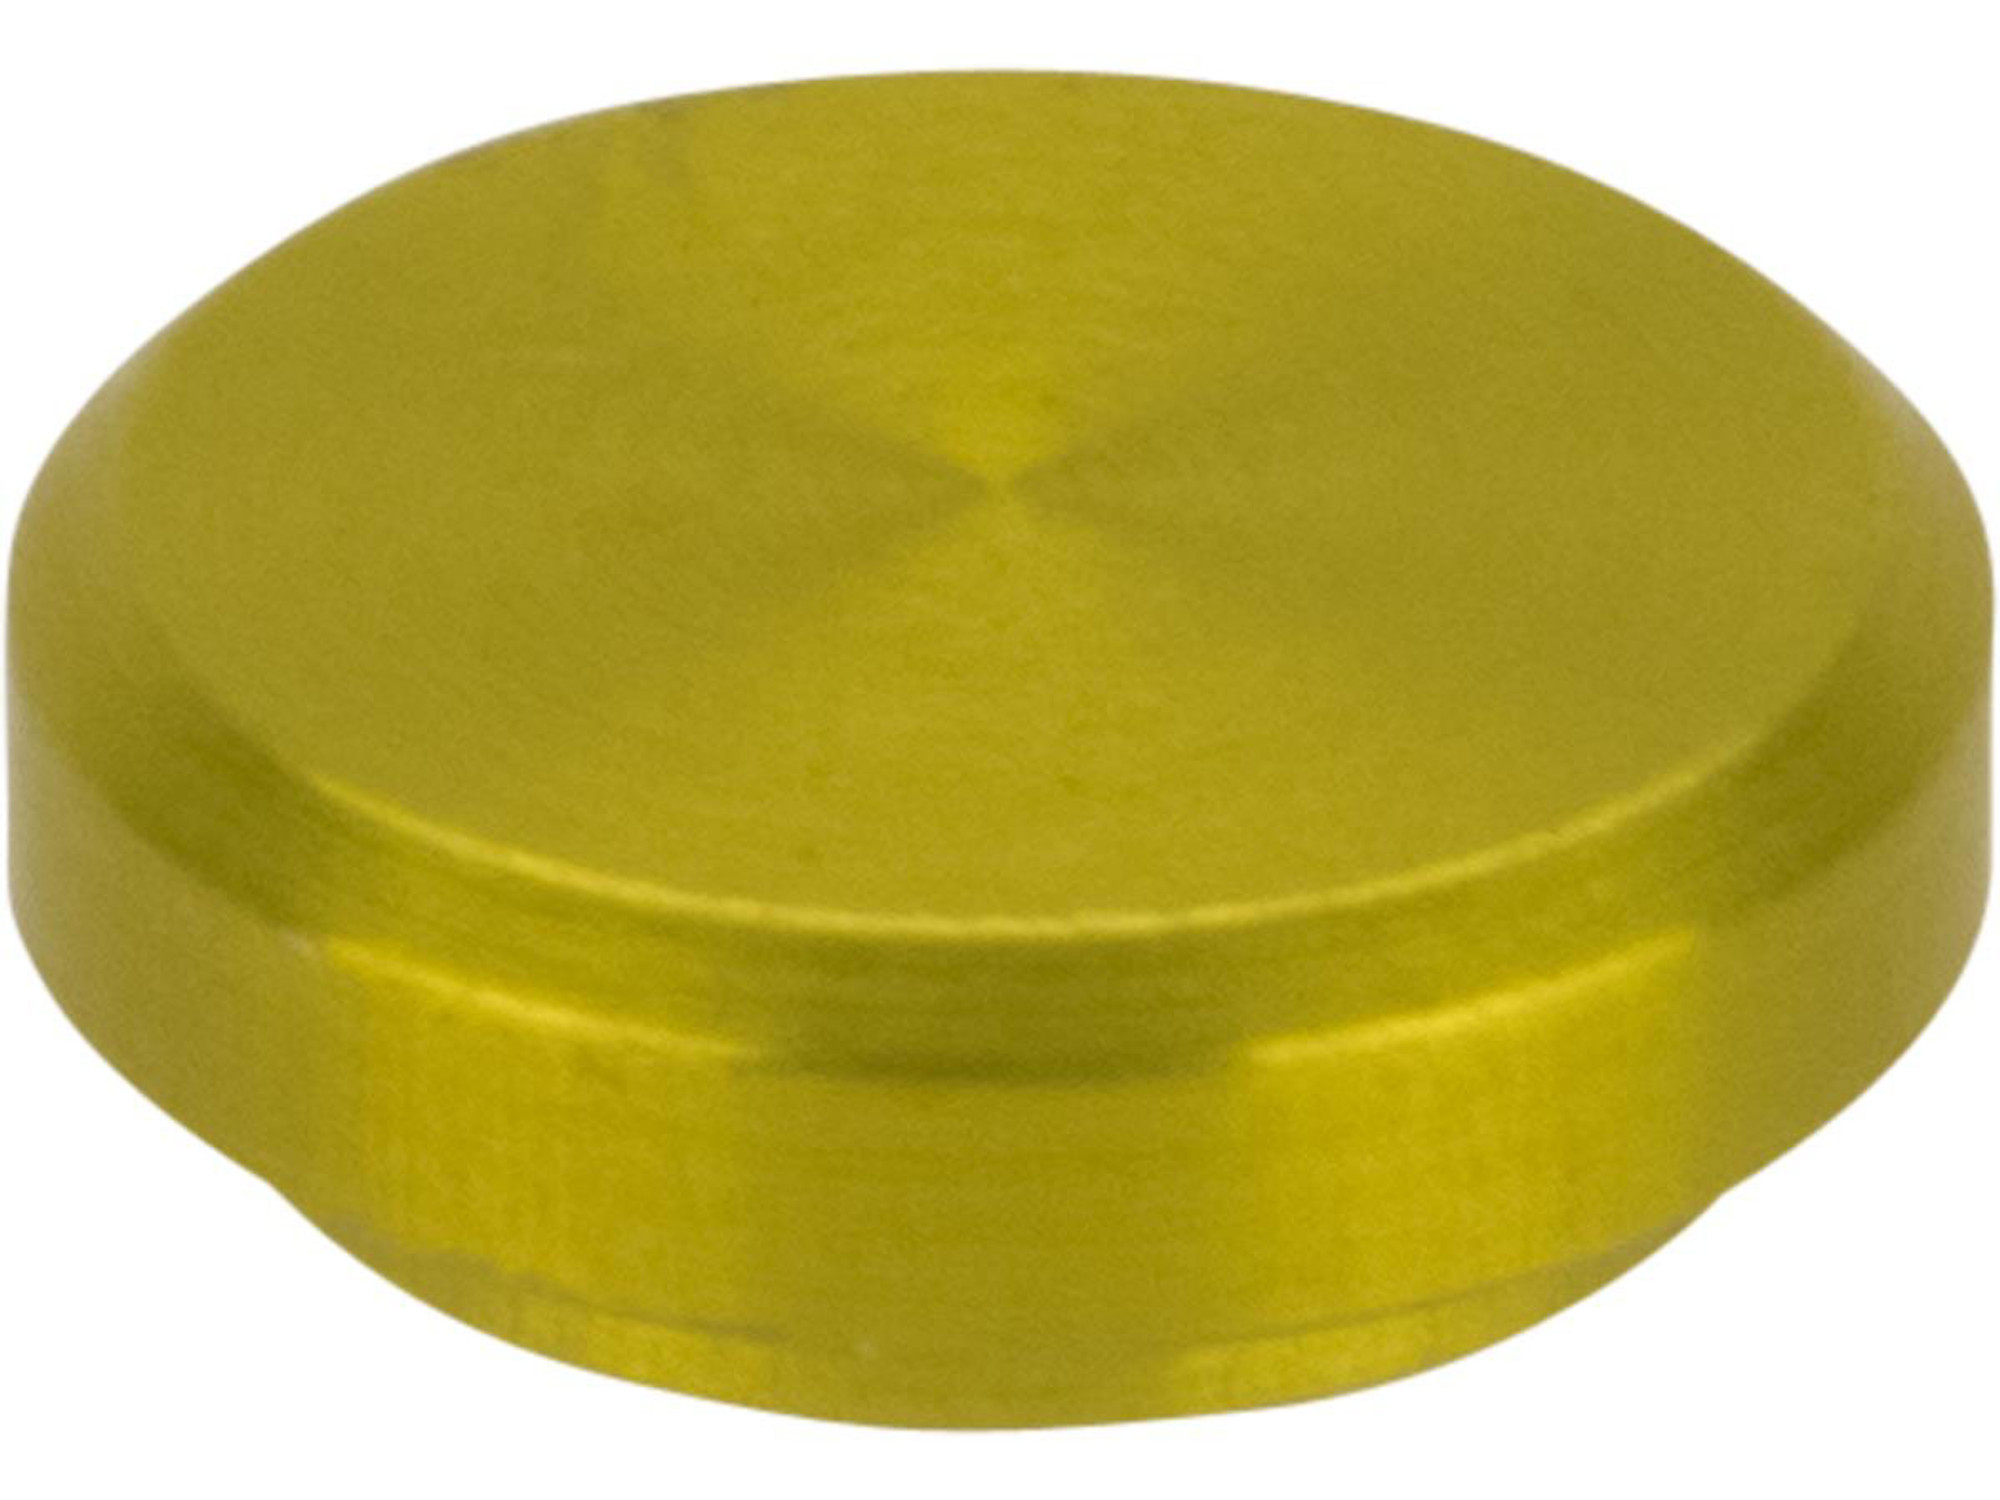 Retro Arms CNC Machined Aluminum Fire Selector Cover / Plug for M4 / M16 Series AEGs (Color: Yellow)